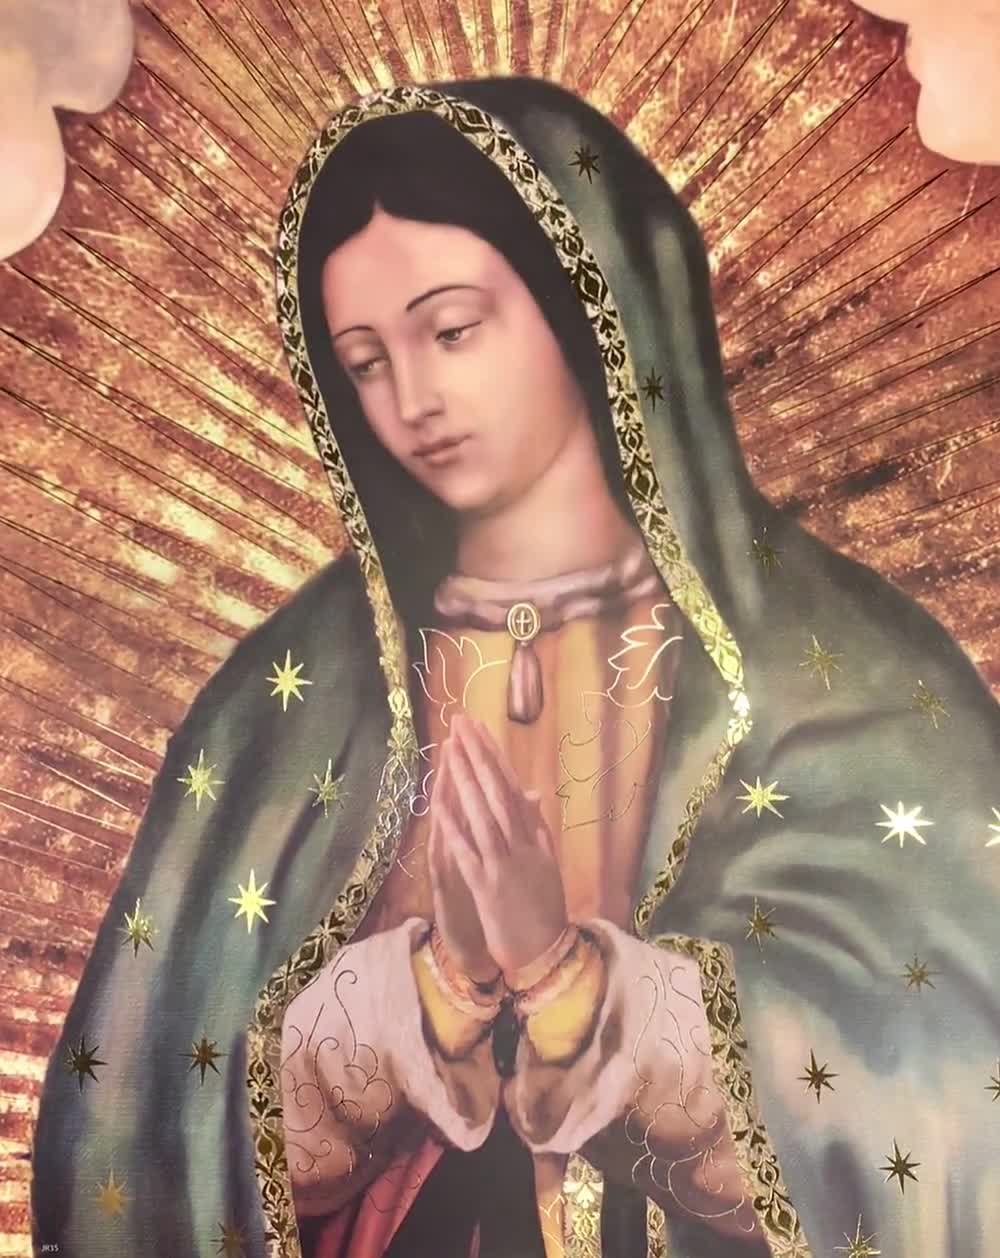 Our Lady of Guadalupe Virgin Mary Religious Art Prints That GLOW half Body  Image, Father's Day, Virgen De Guadalupe, Virgin Mary 